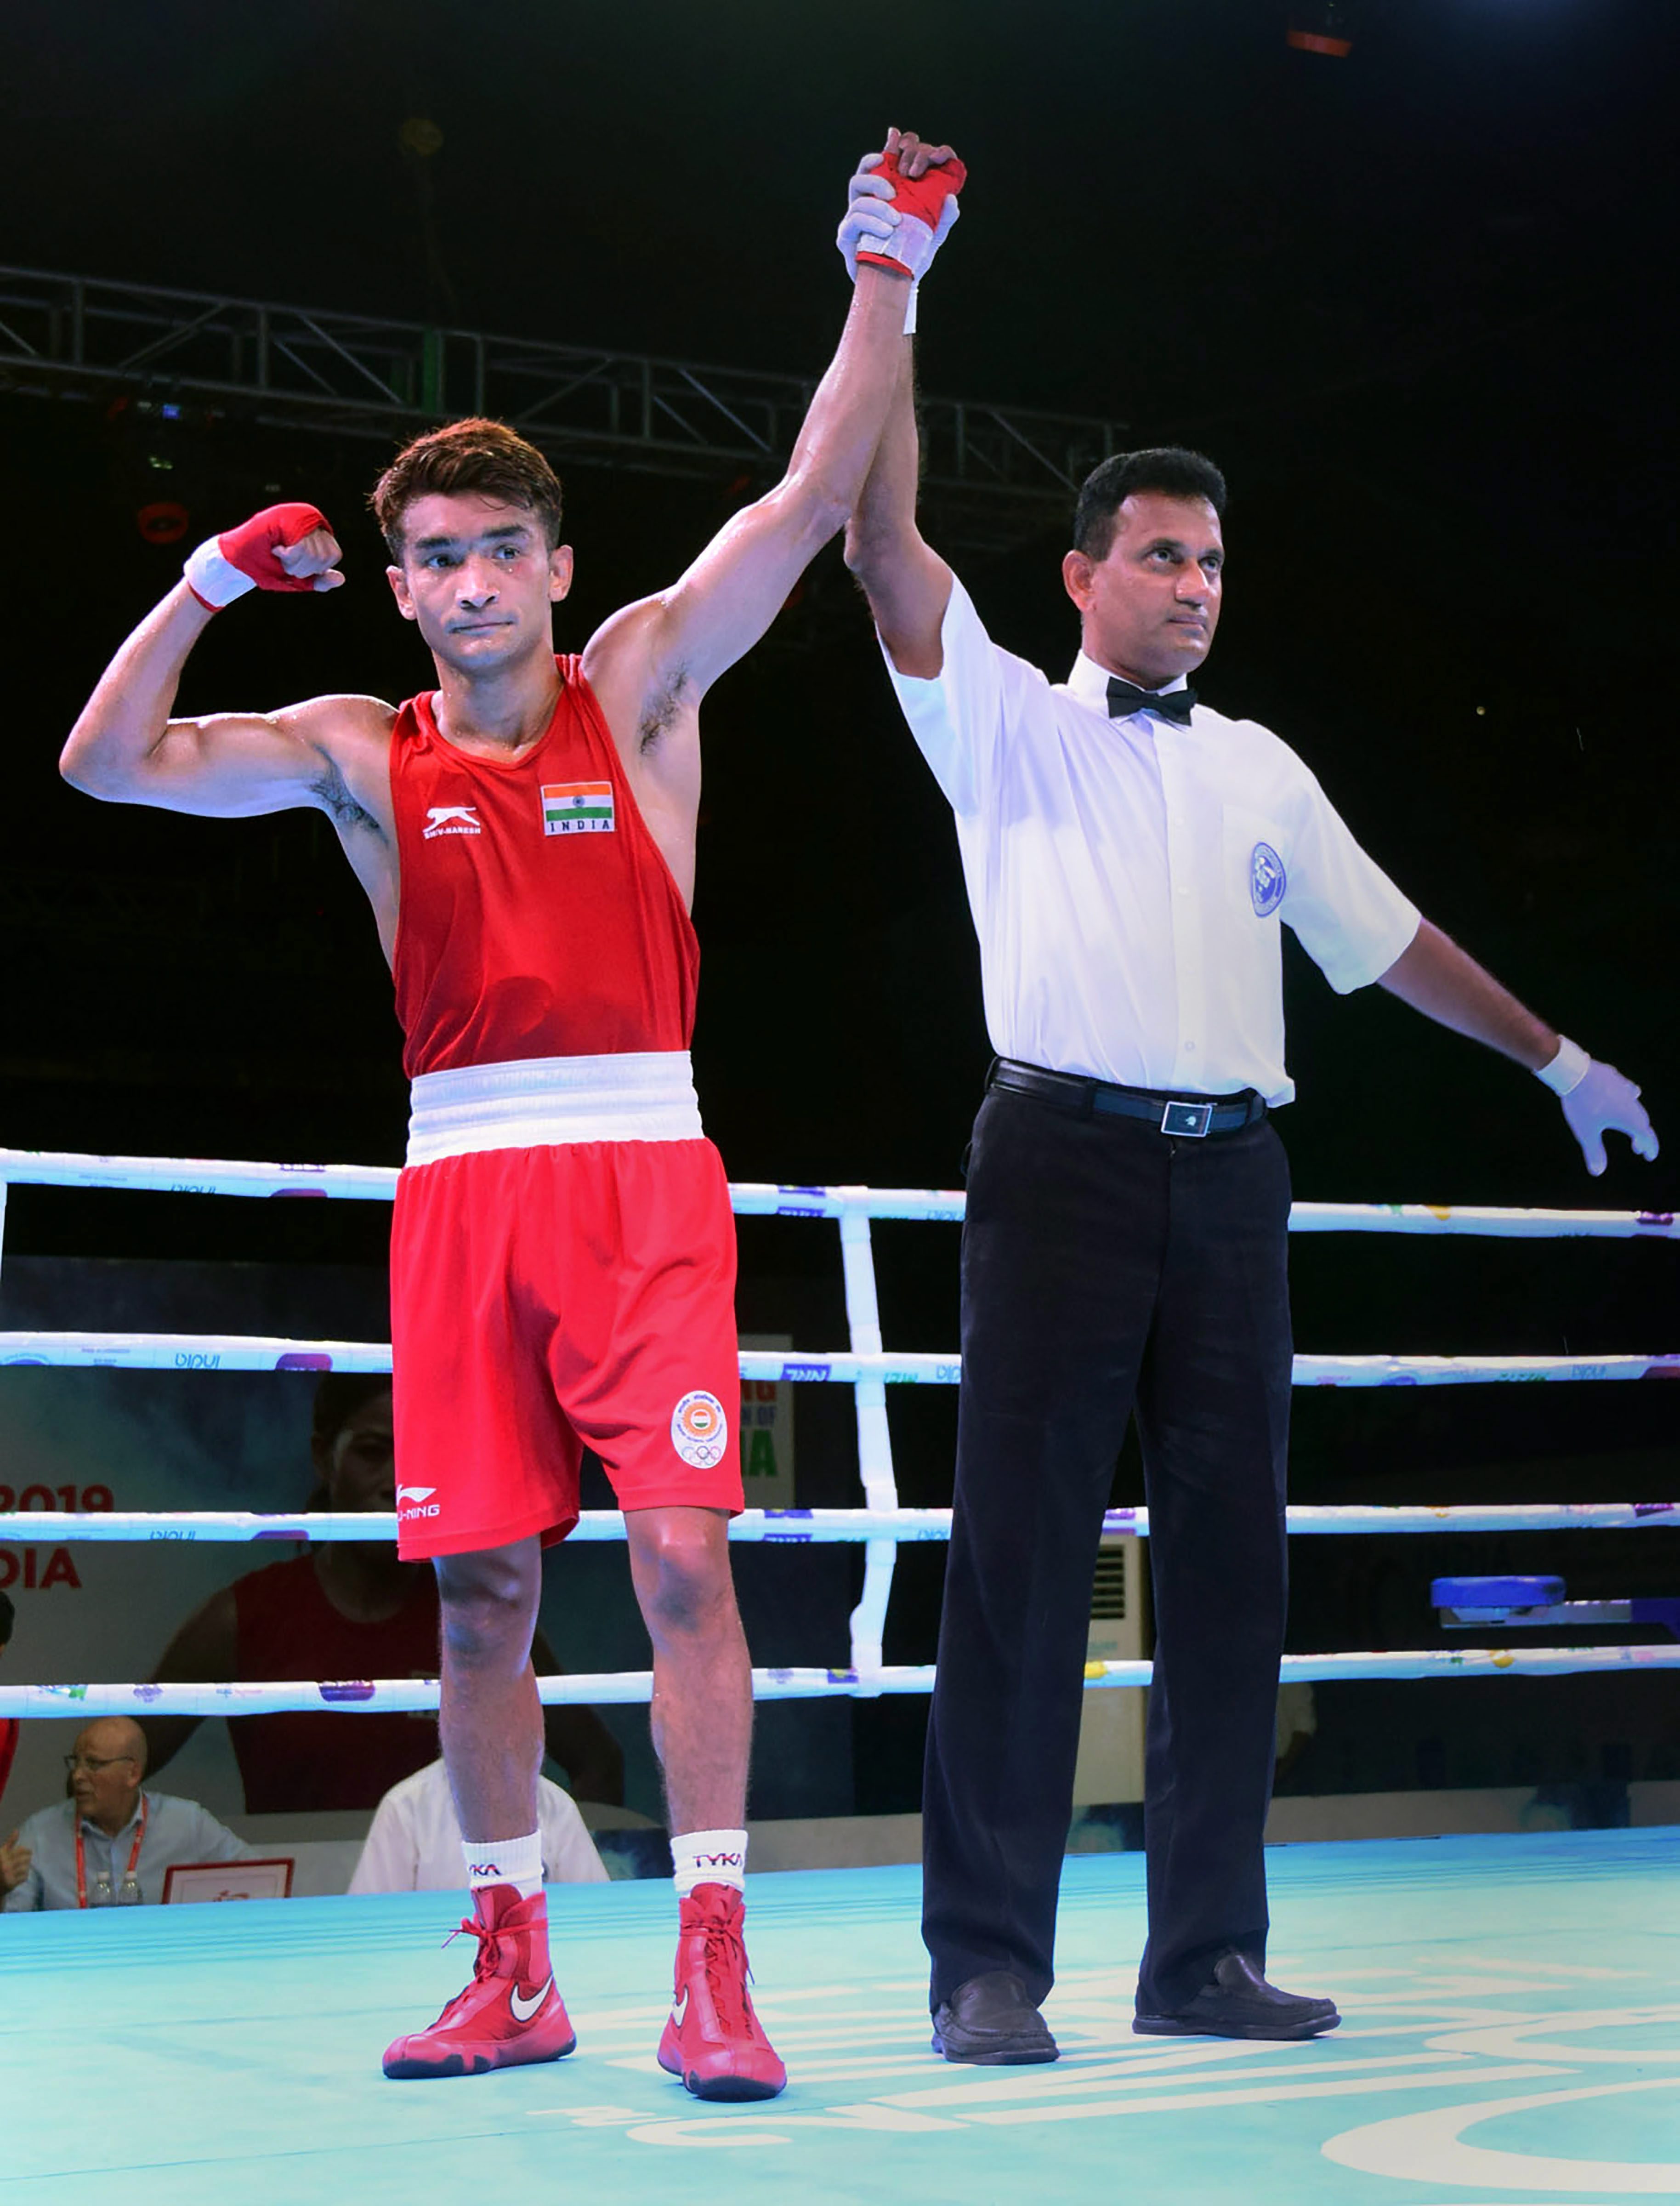 Indian boxer Shiva Thapa being declared winner against Mauritius Hellene Damien in the second edition of Indian Open International Boxing Tournament 2019 in Guwahati - PTI